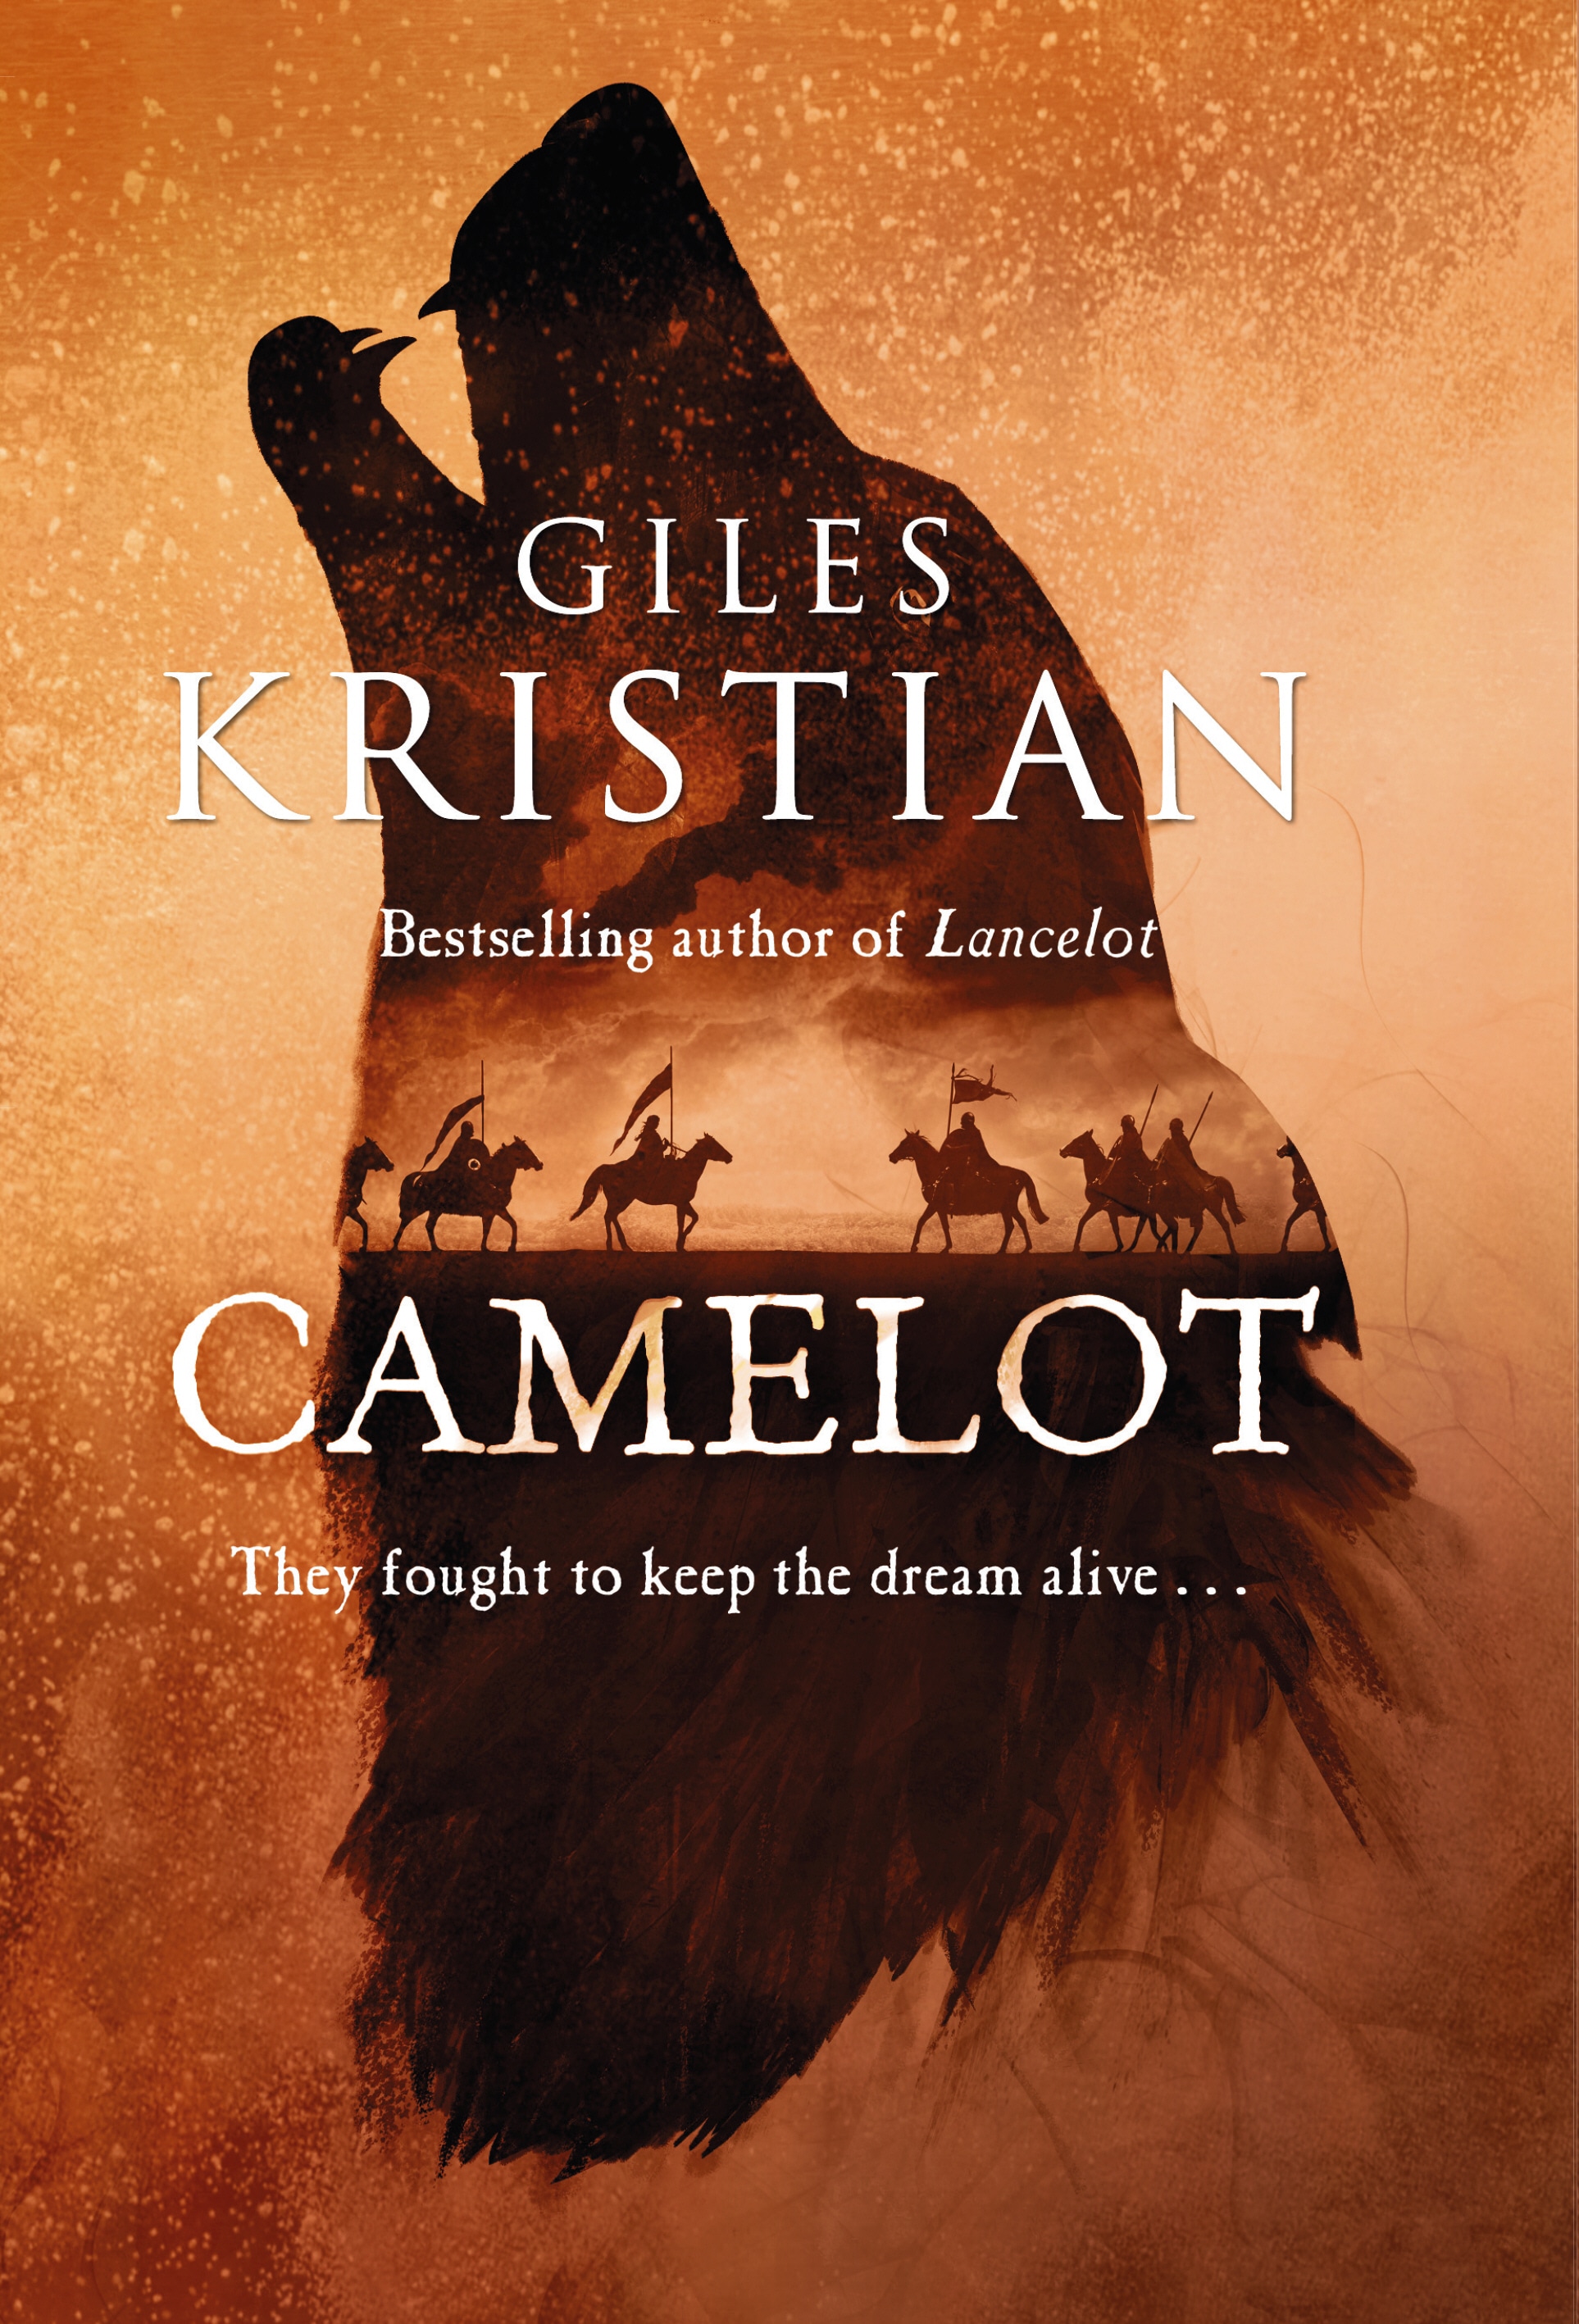 Book “Camelot” by Giles Kristian — May 14, 2020